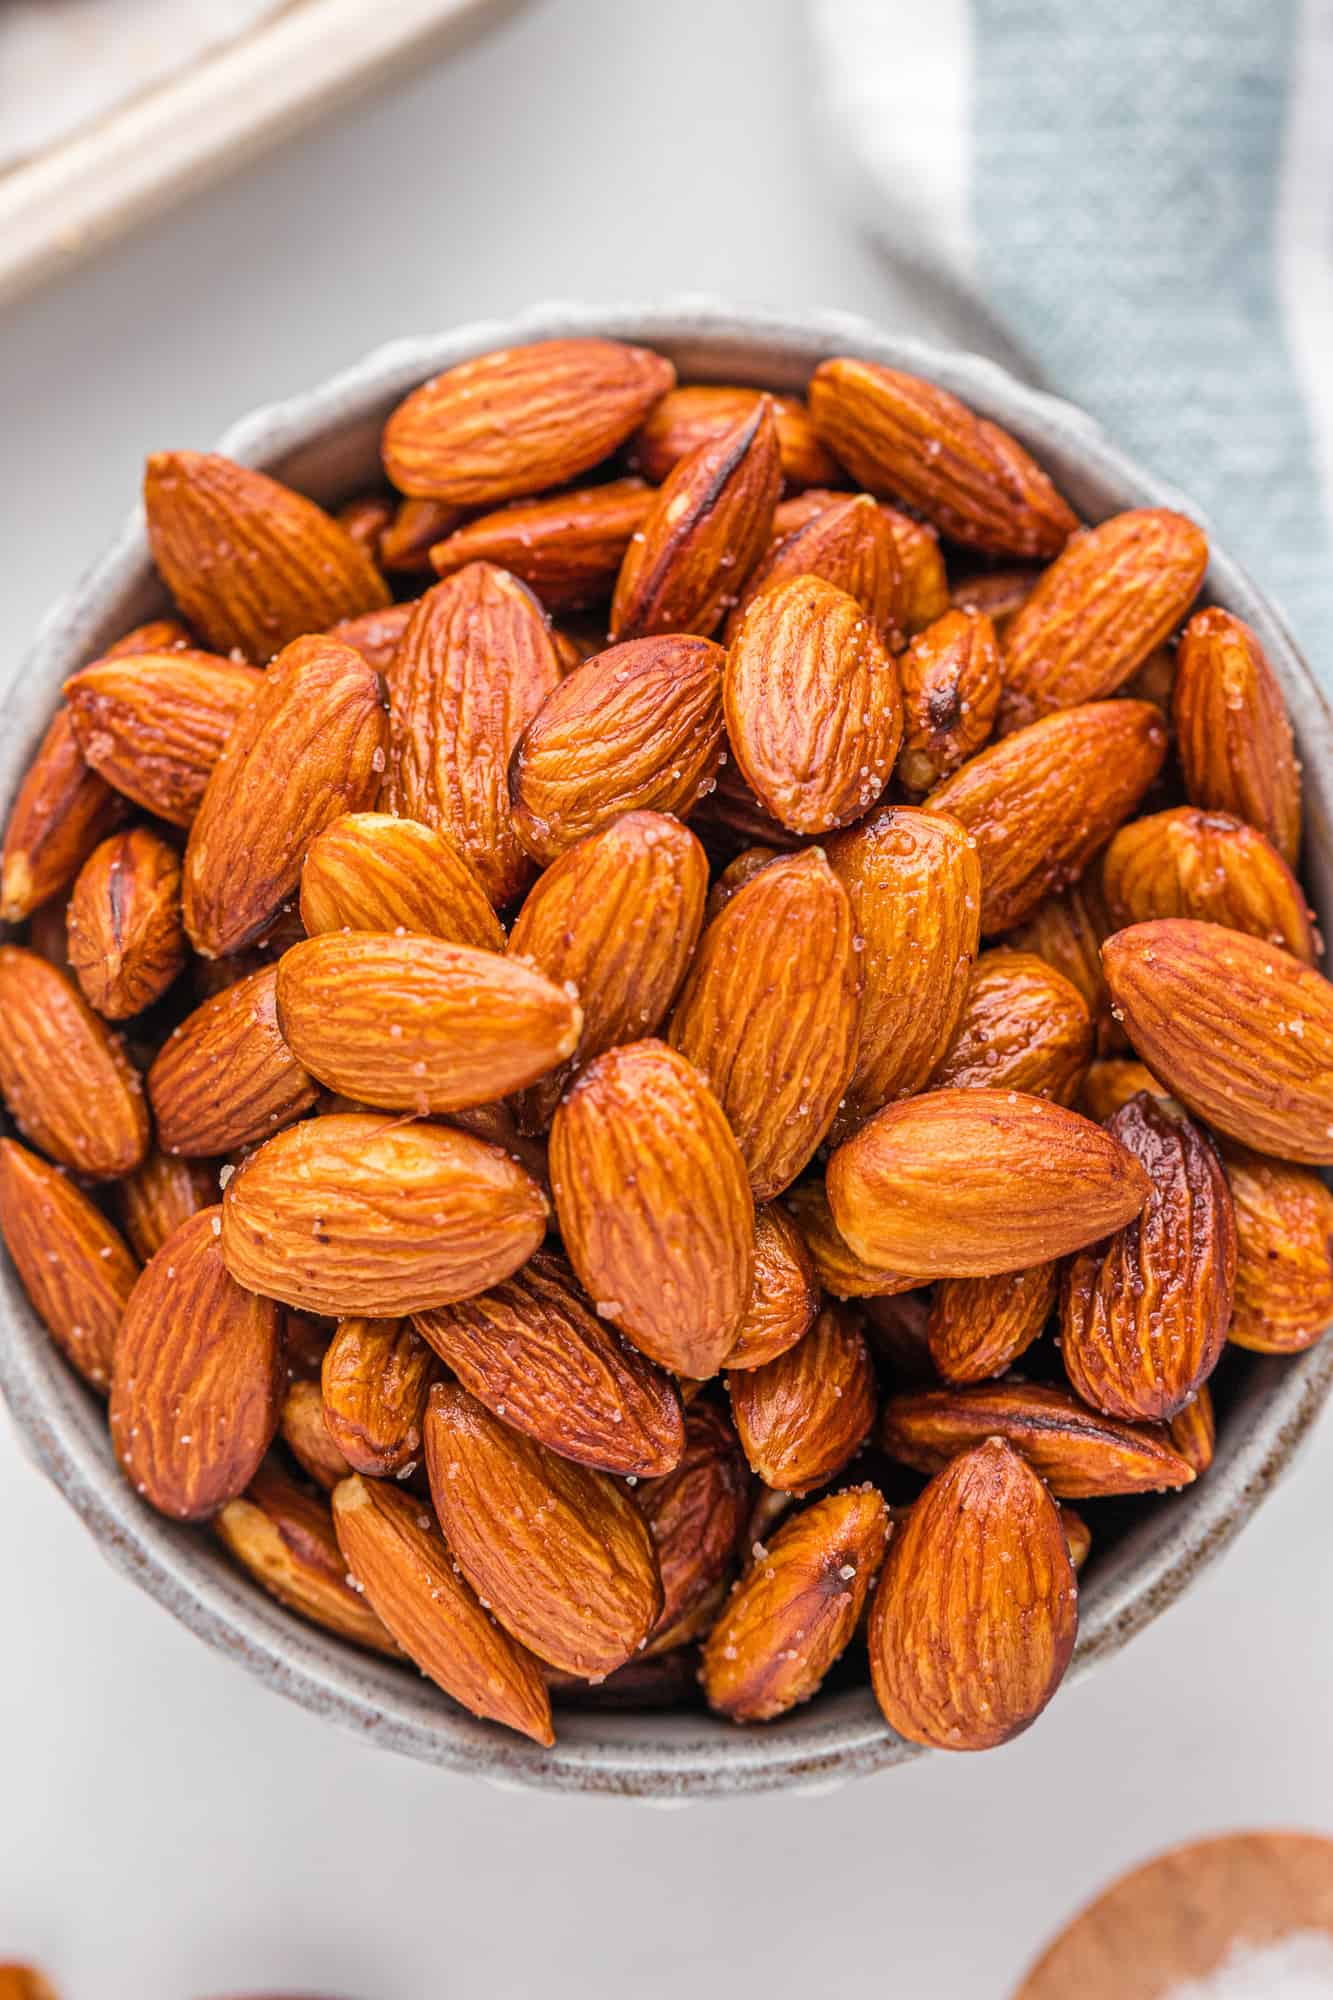 1 tbsp of whole almonds in grams